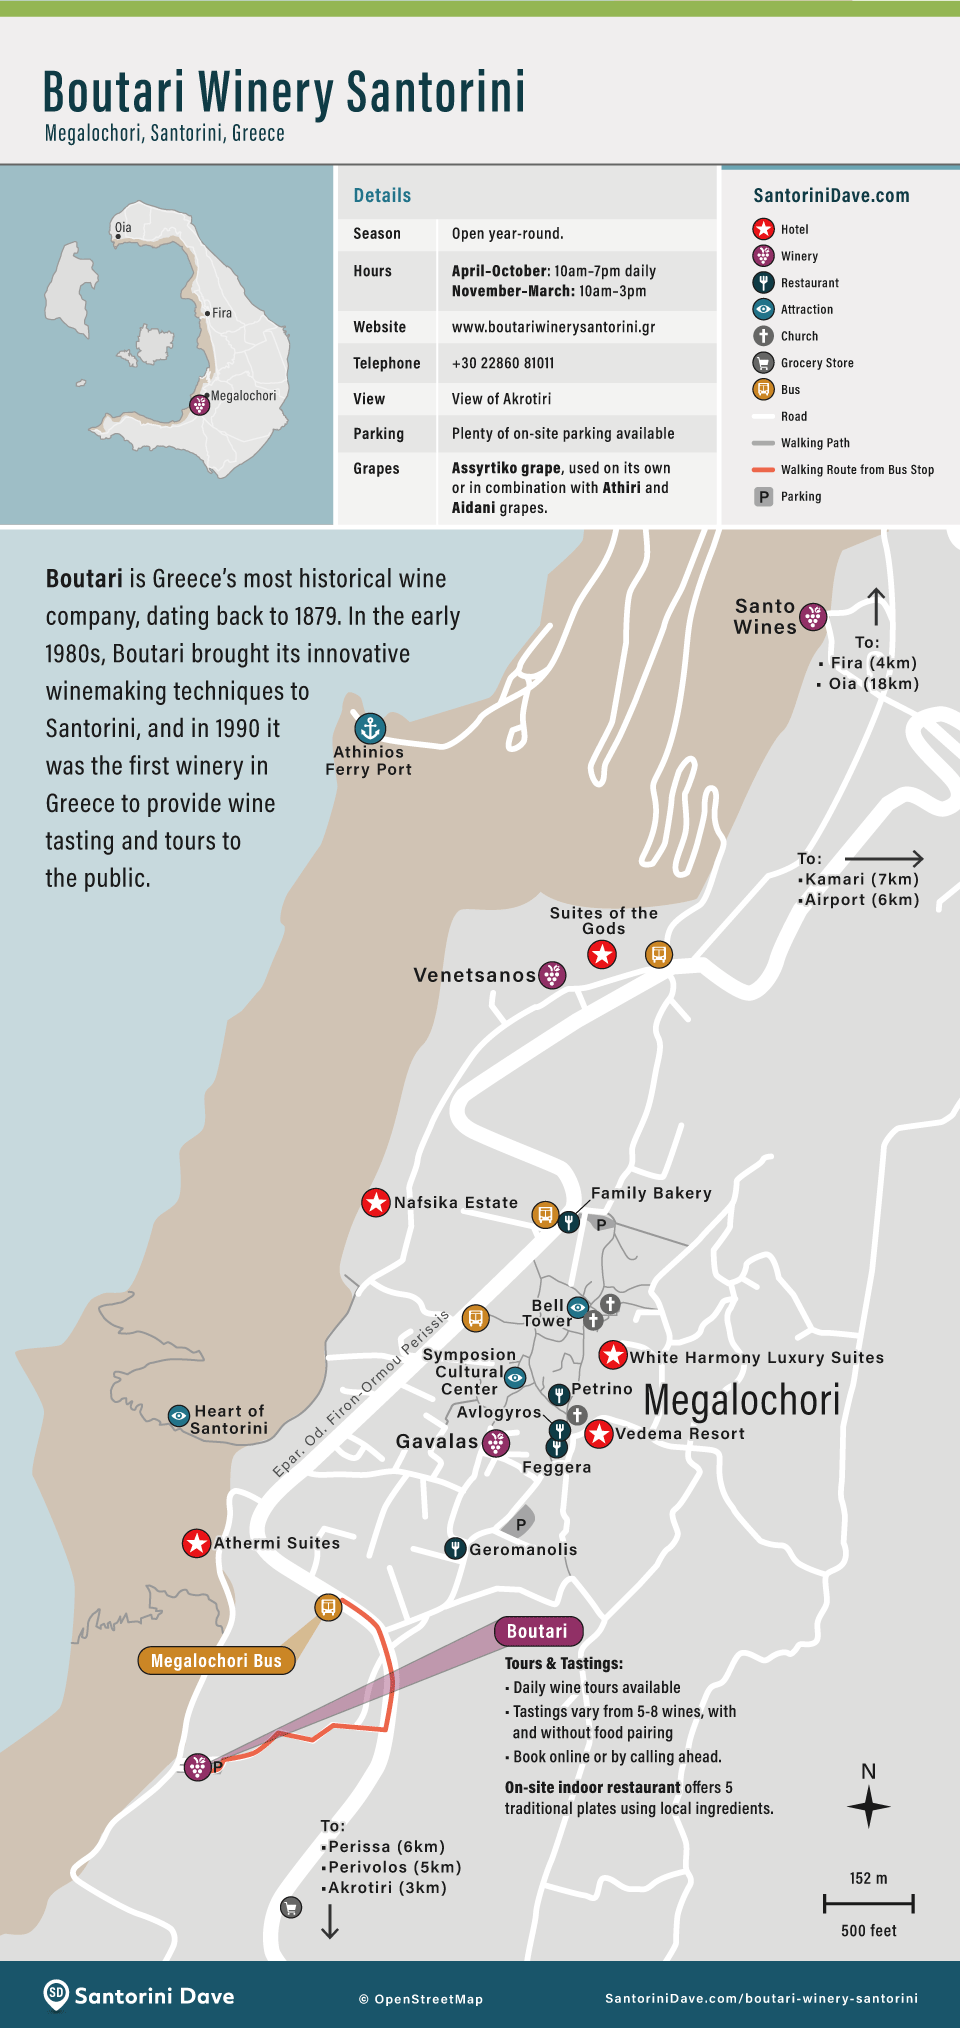 Map showing the location and surrounding hotels and attractions of Boutari Winery in Santorini